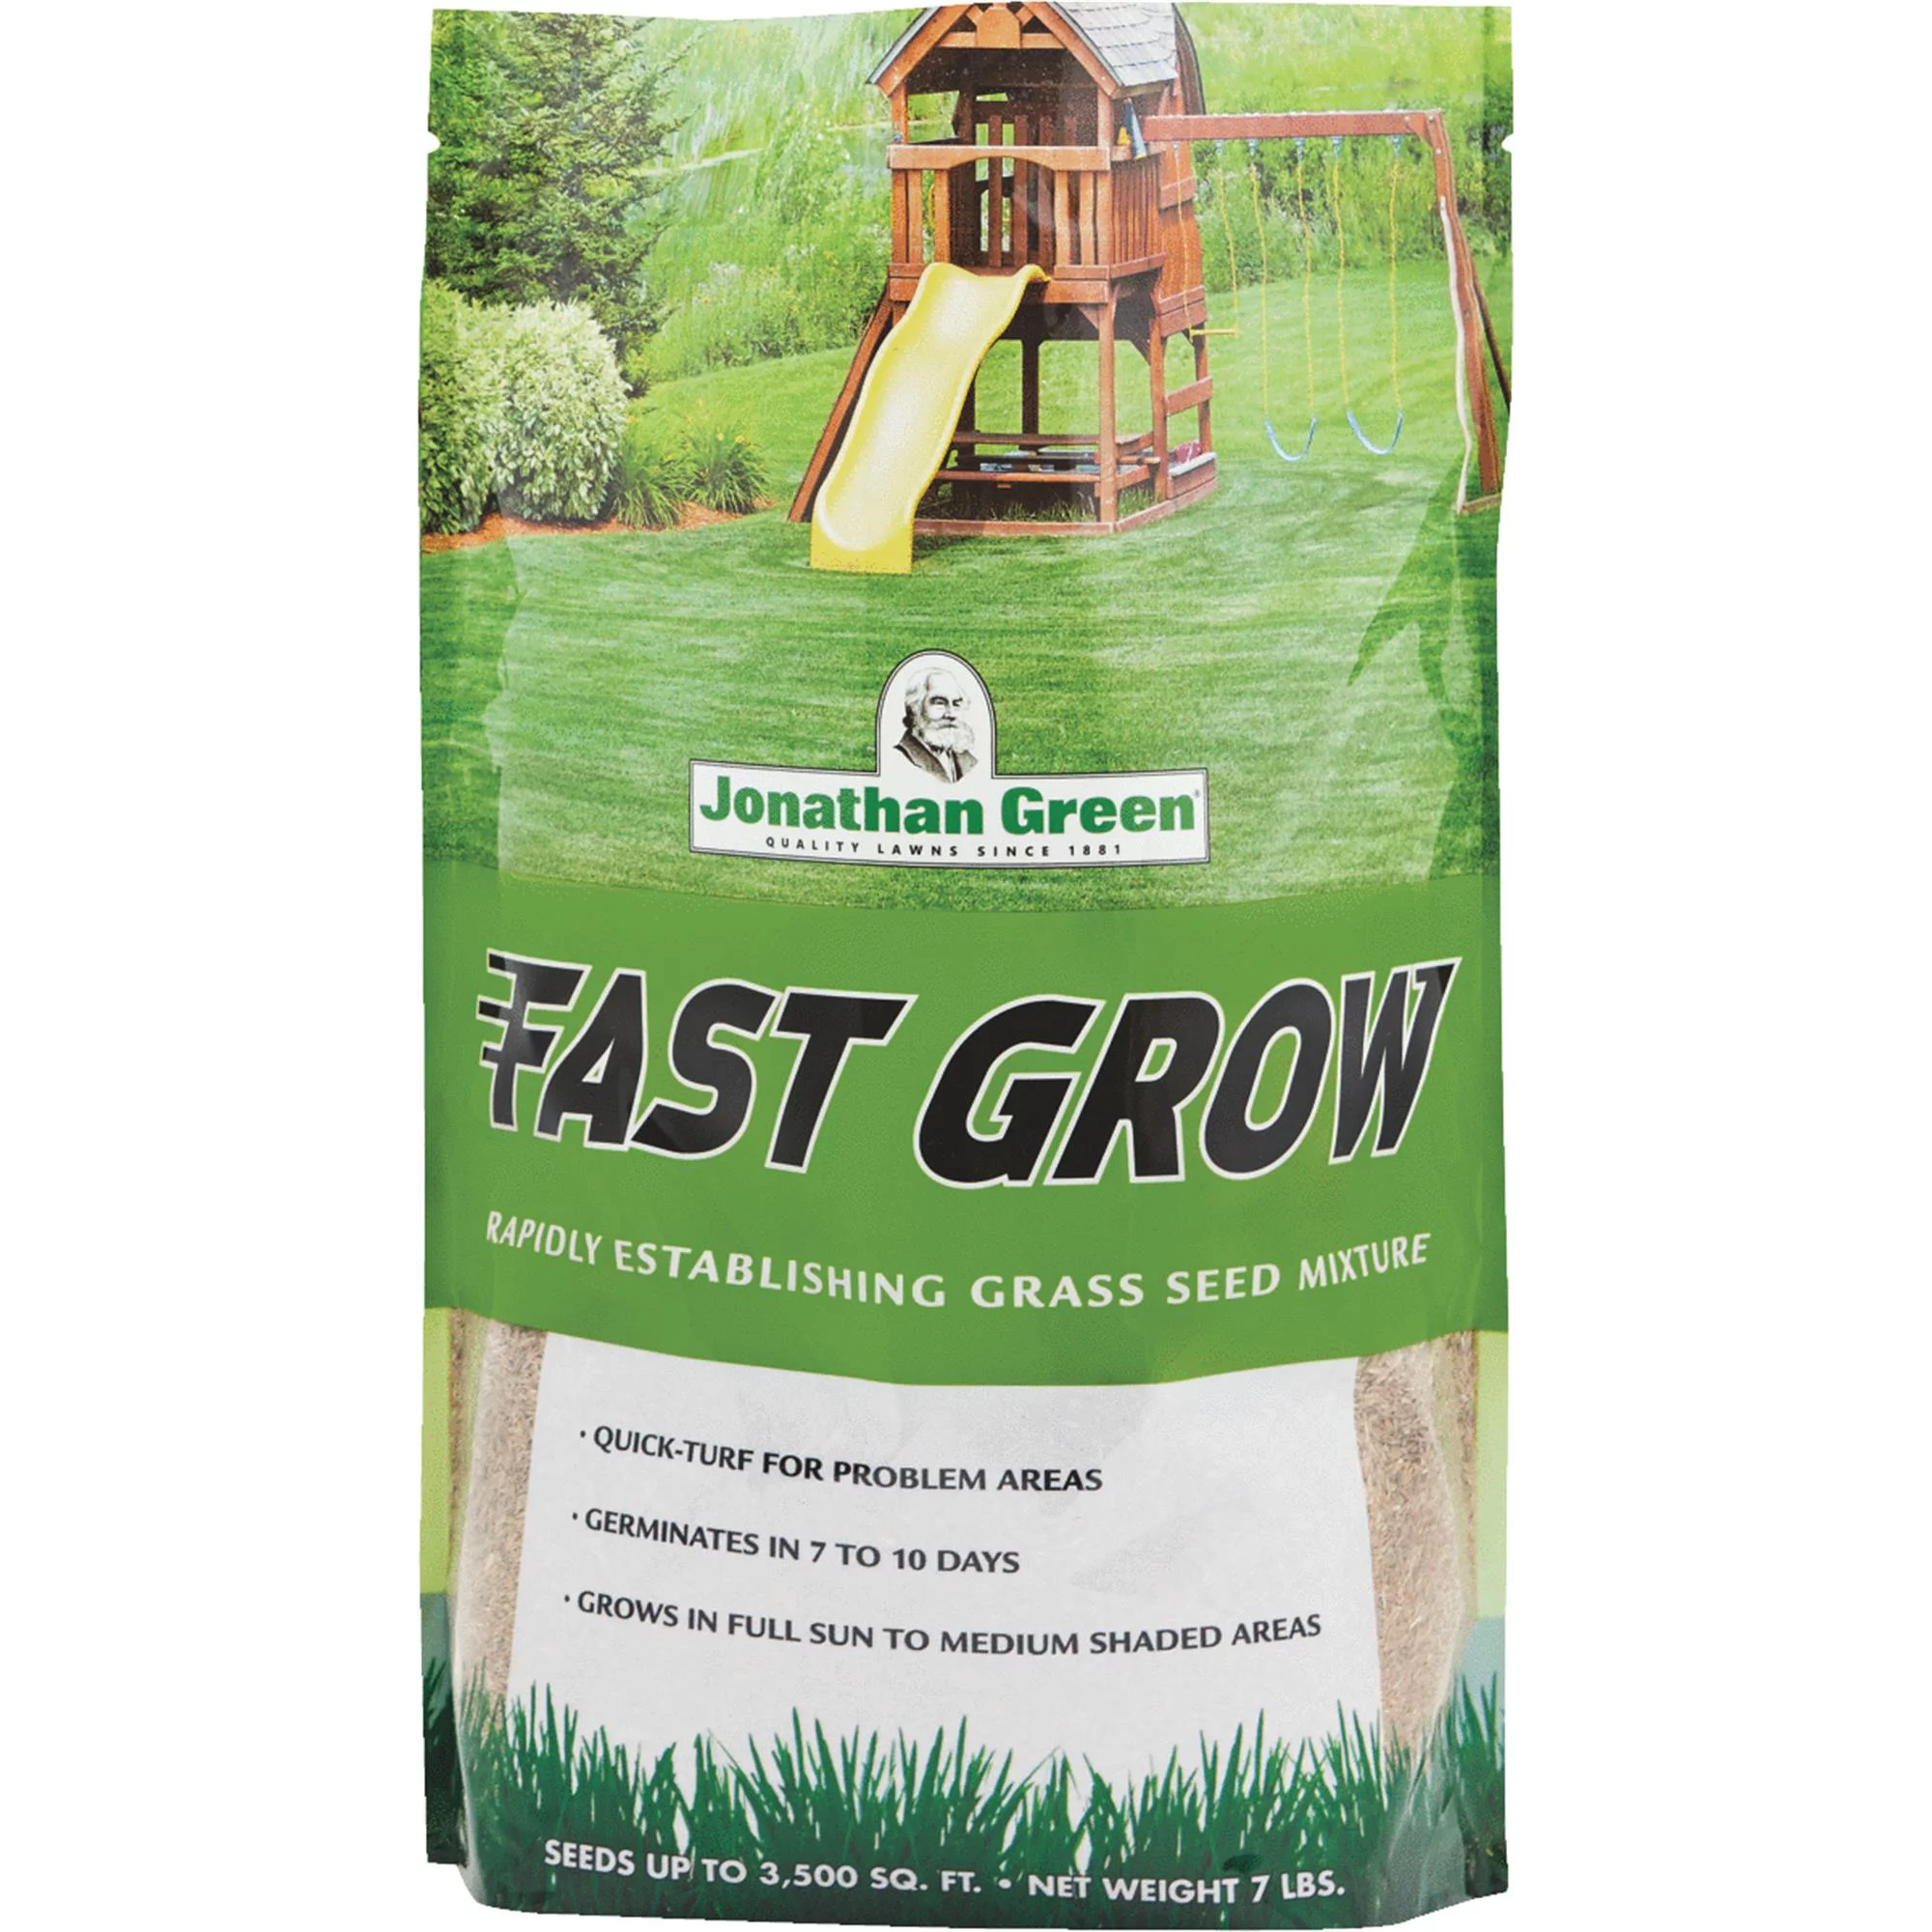 What Helps Grass Grow Fast